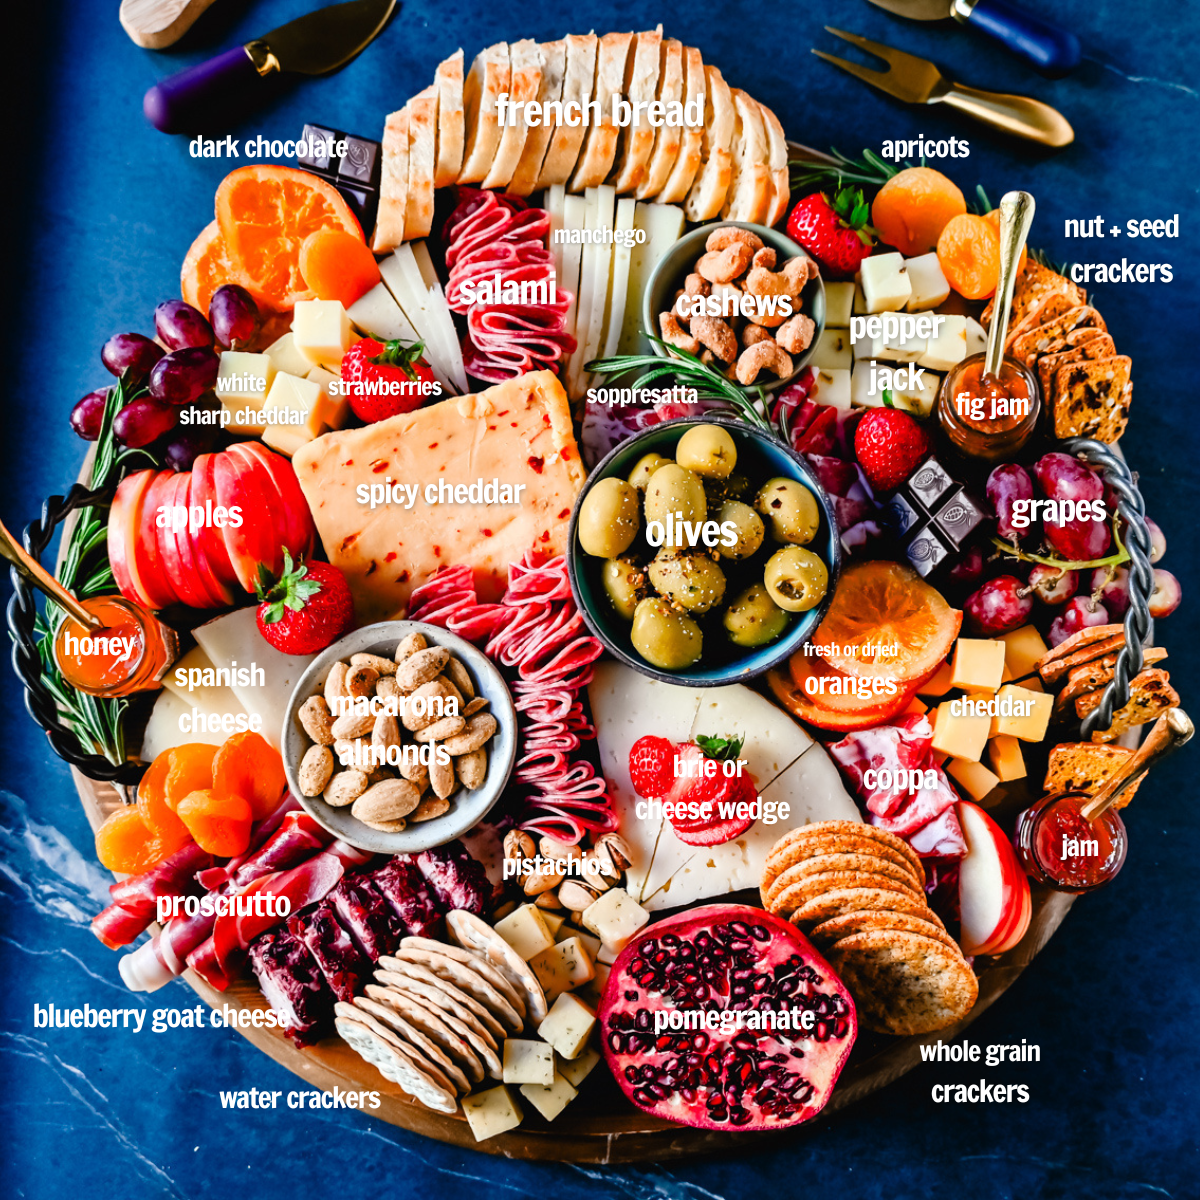 How to make the Best Charcuterie Board. An essential guide to everything about charcuterie boards from what to put on charcuterie boards to the best cheeses for charcuterie to the best wood boards and where to buy ingredients for charcuterie boards. This is the ultimate guide to making the best charcuterie board!